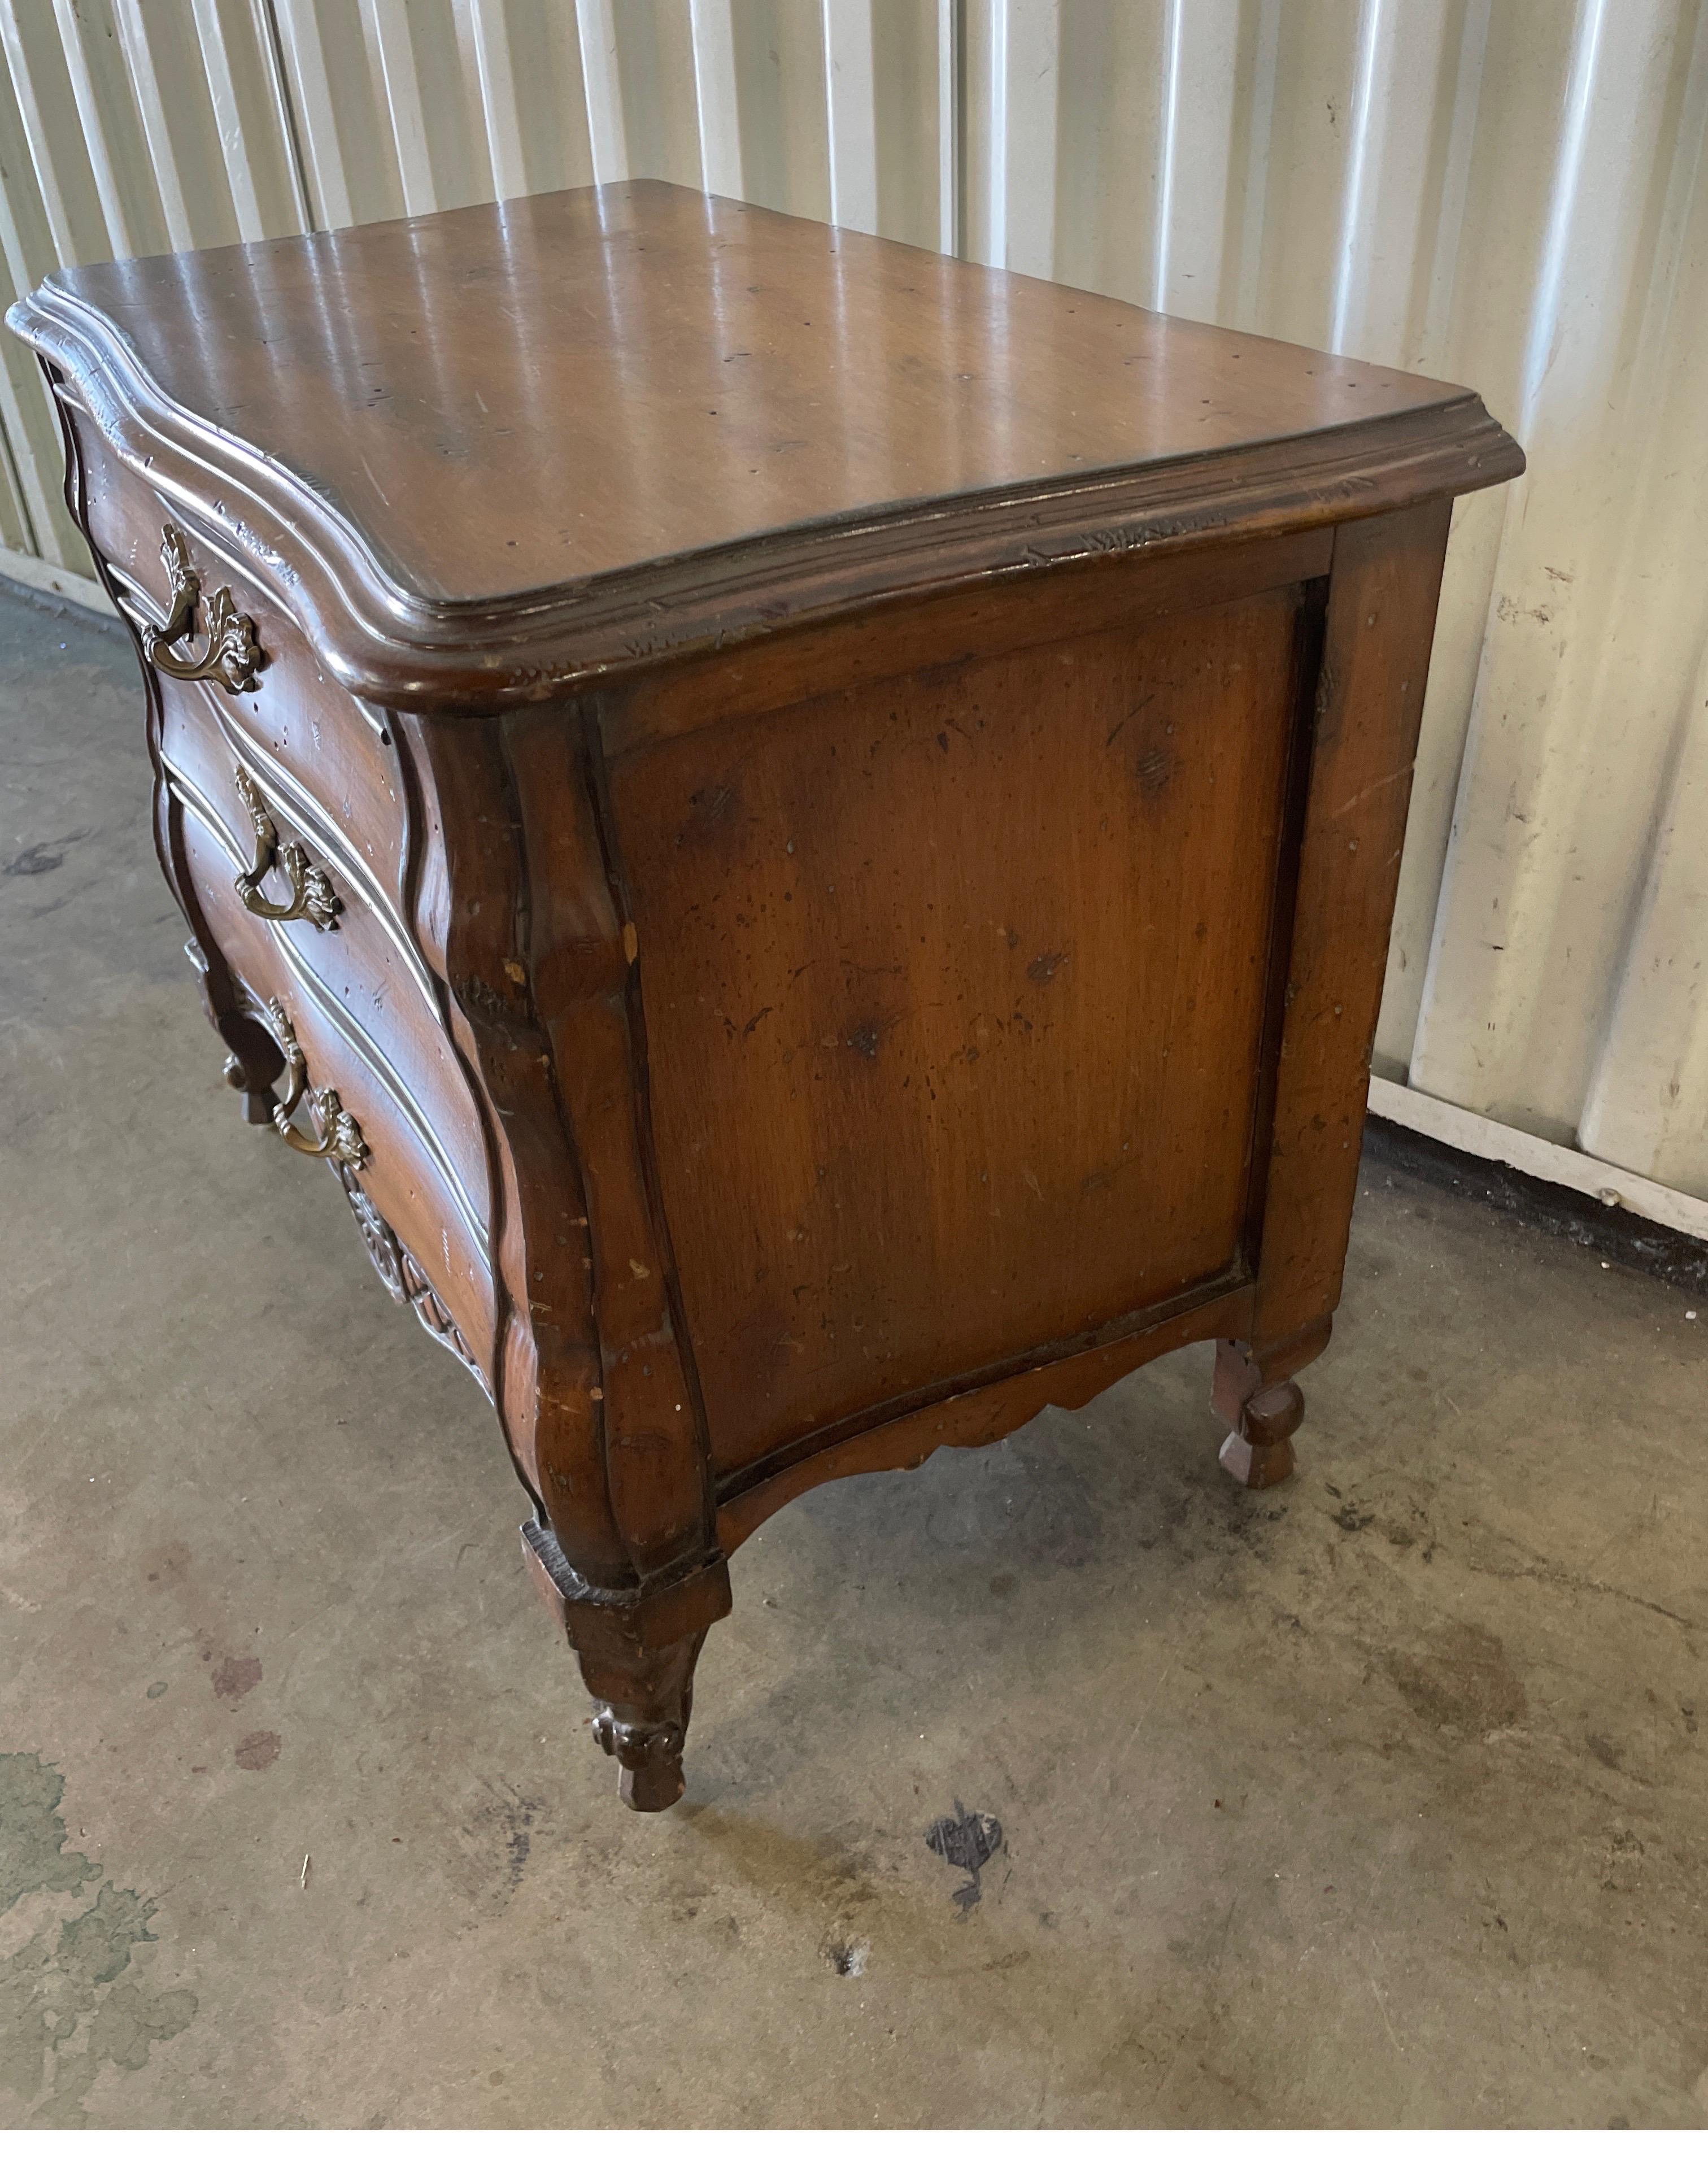 Charming three drawer miniature Louis XV style chest of drawers.  Place next to a chair as a book rest or drinks table. Would also make a nice jewelry chest.